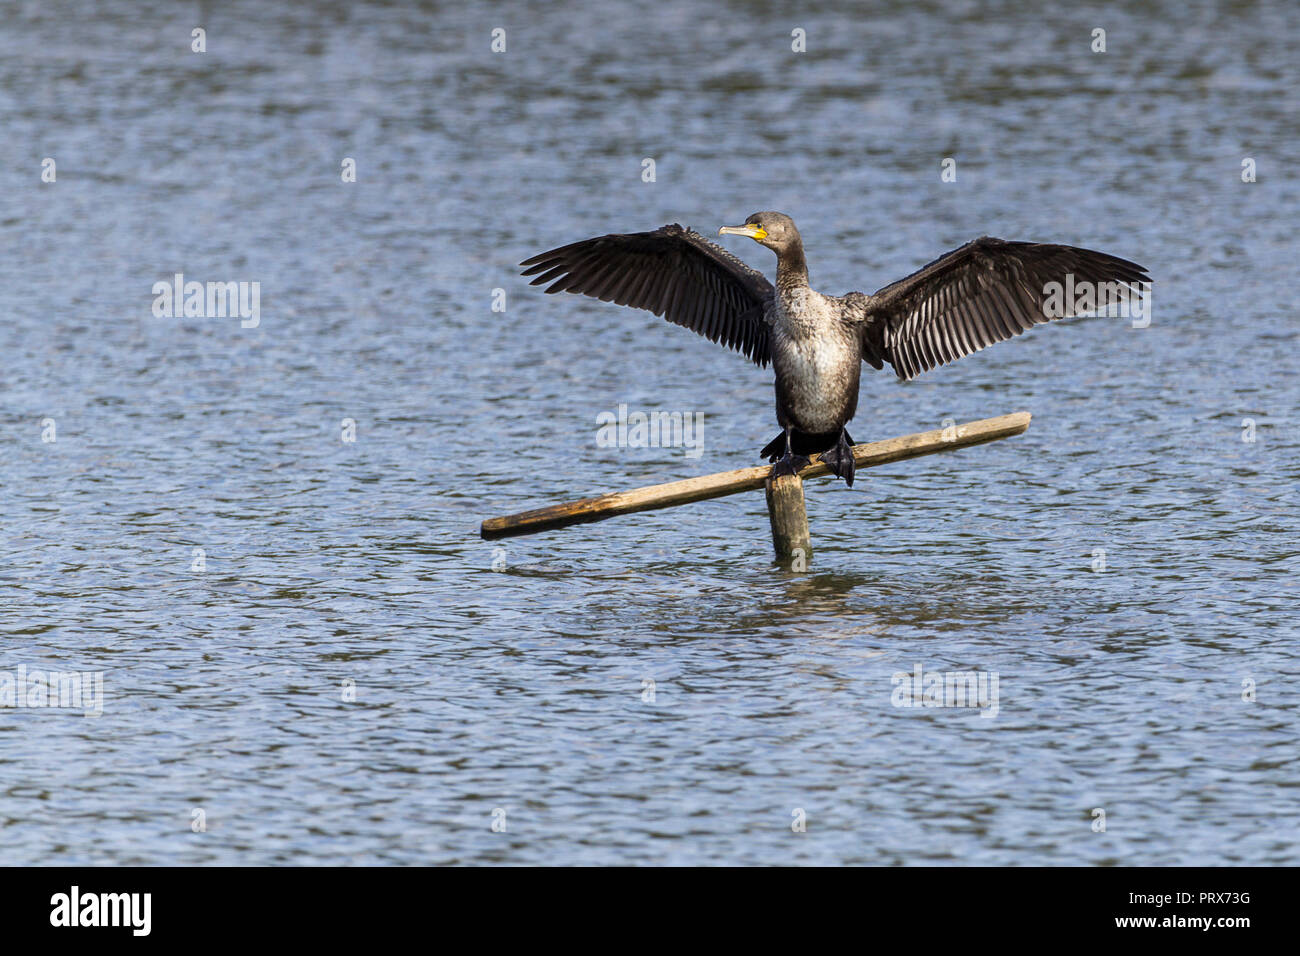 Cormorant (Phalacrocorax carbo) drying its spread out wings after swimming and diving for fish. Has a hooked bill flat forehead and blackish plumage. Stock Photo